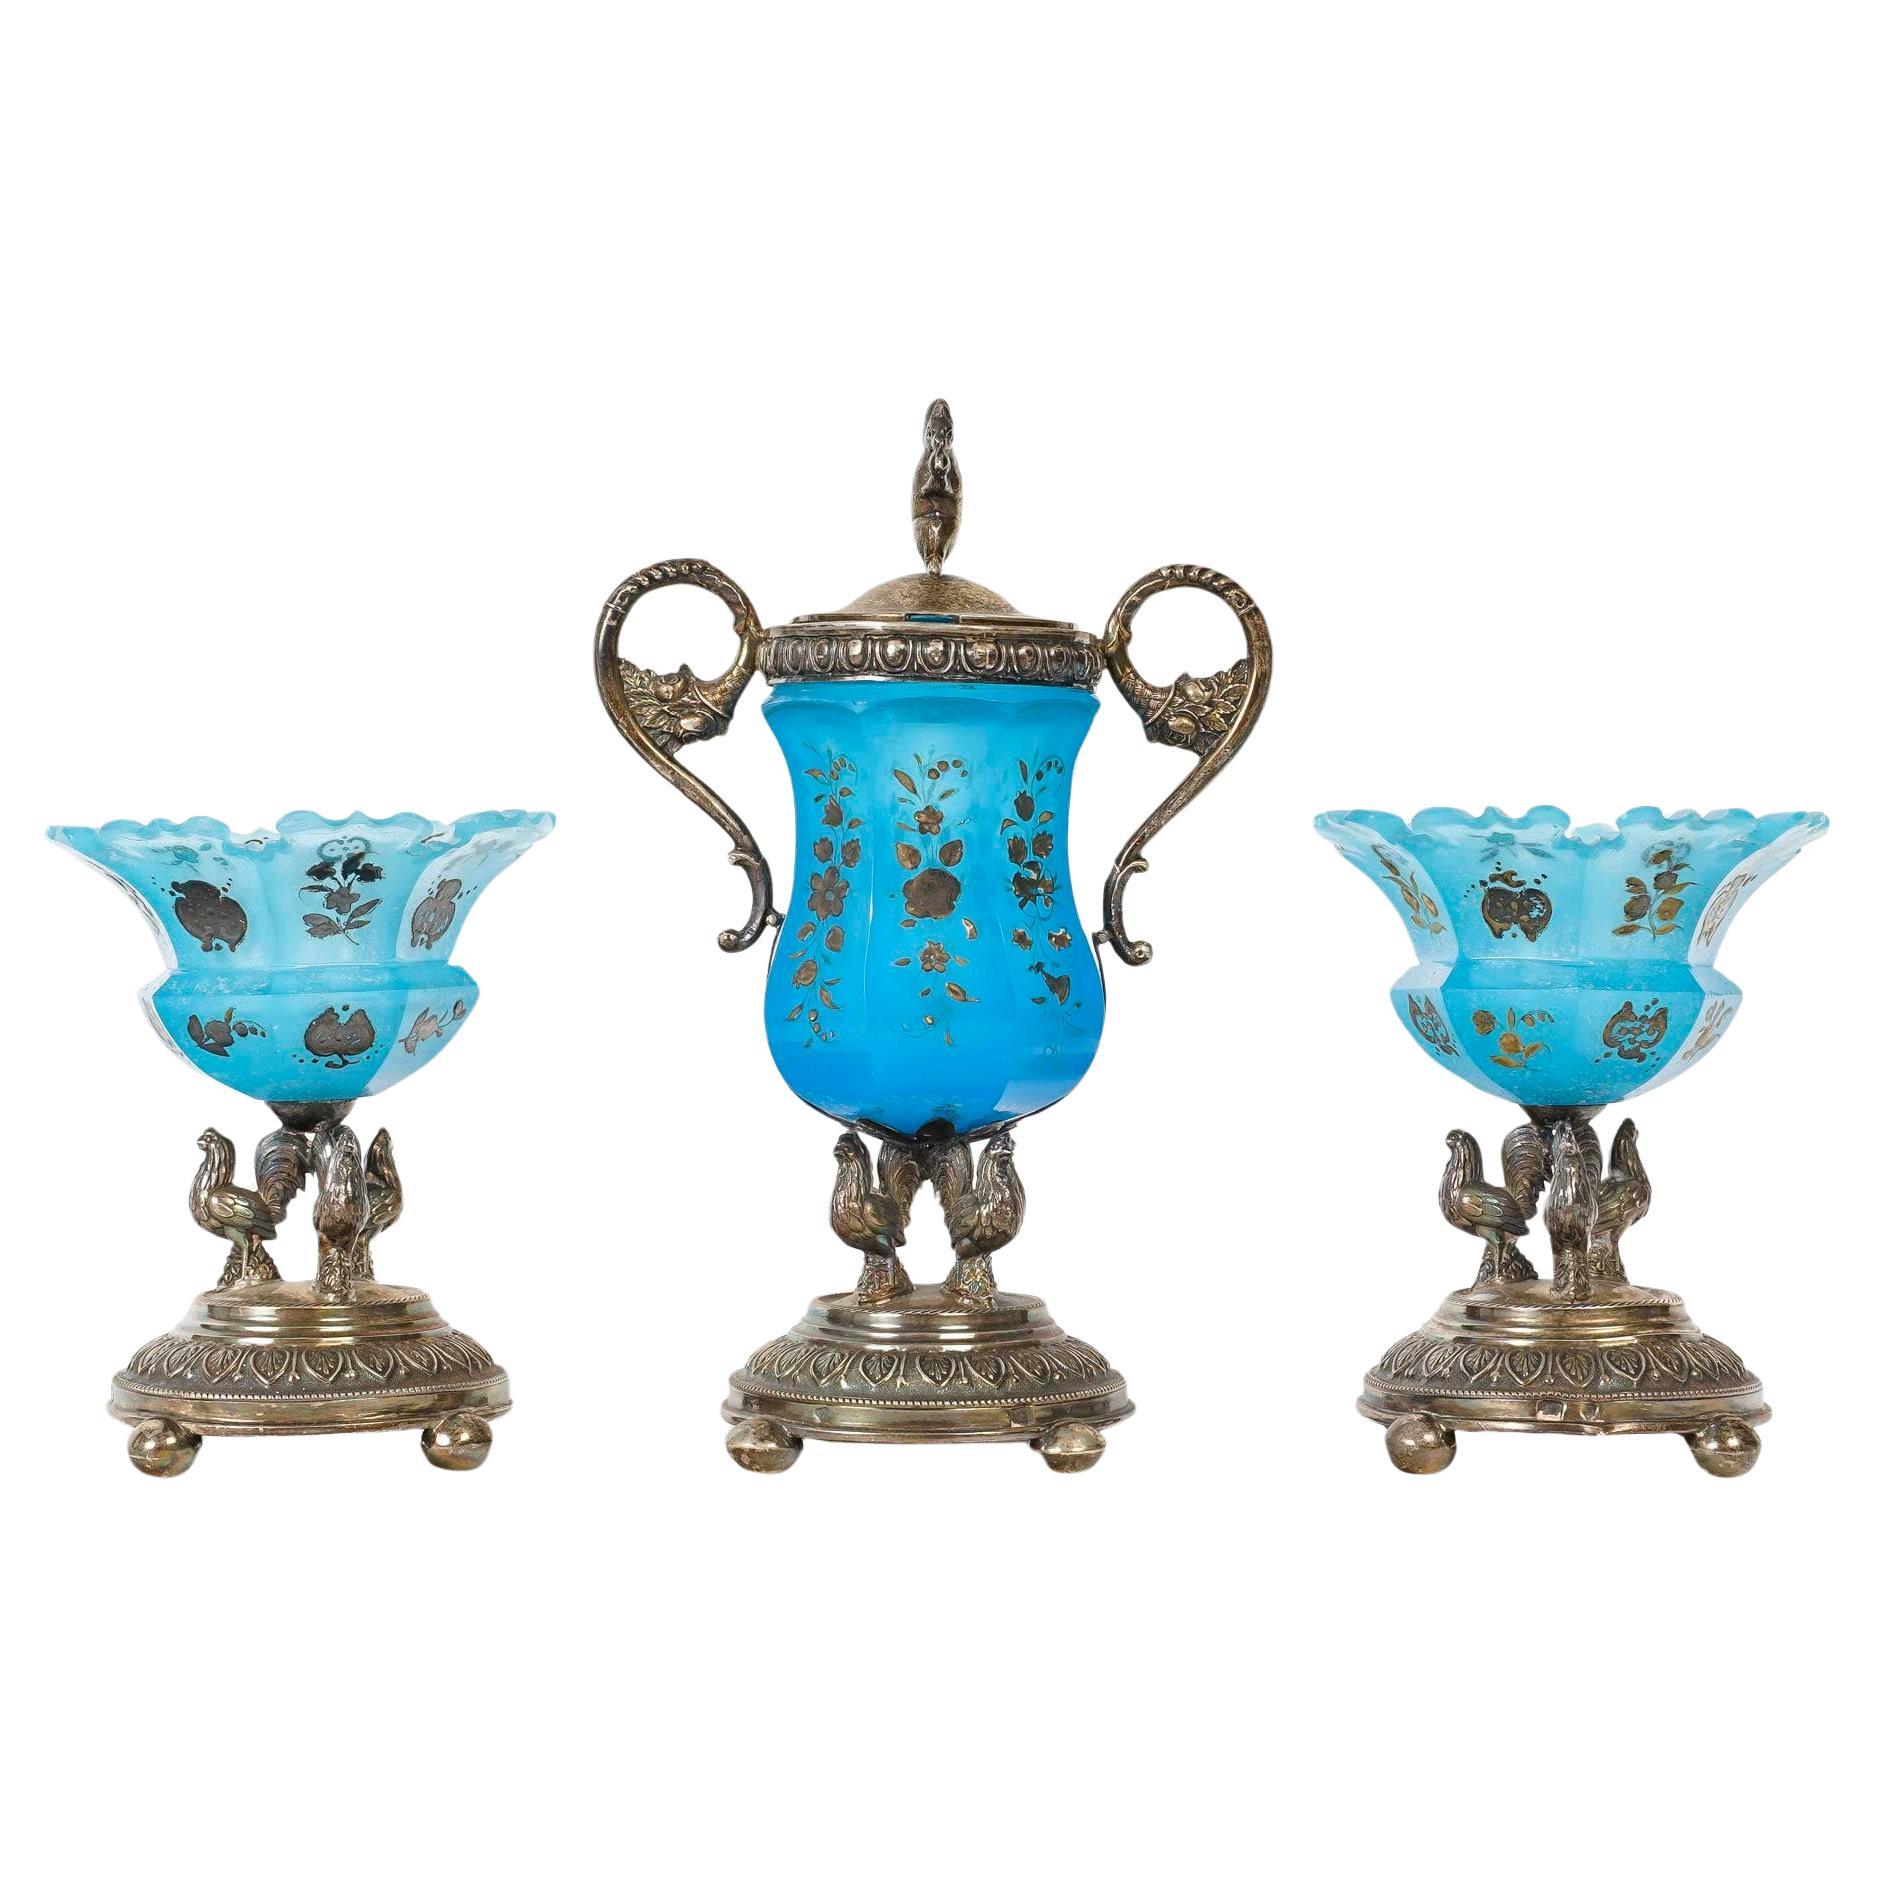 Jam Set in Blue Enamelled Opaline and Silver Plated Metal, 19th Century.